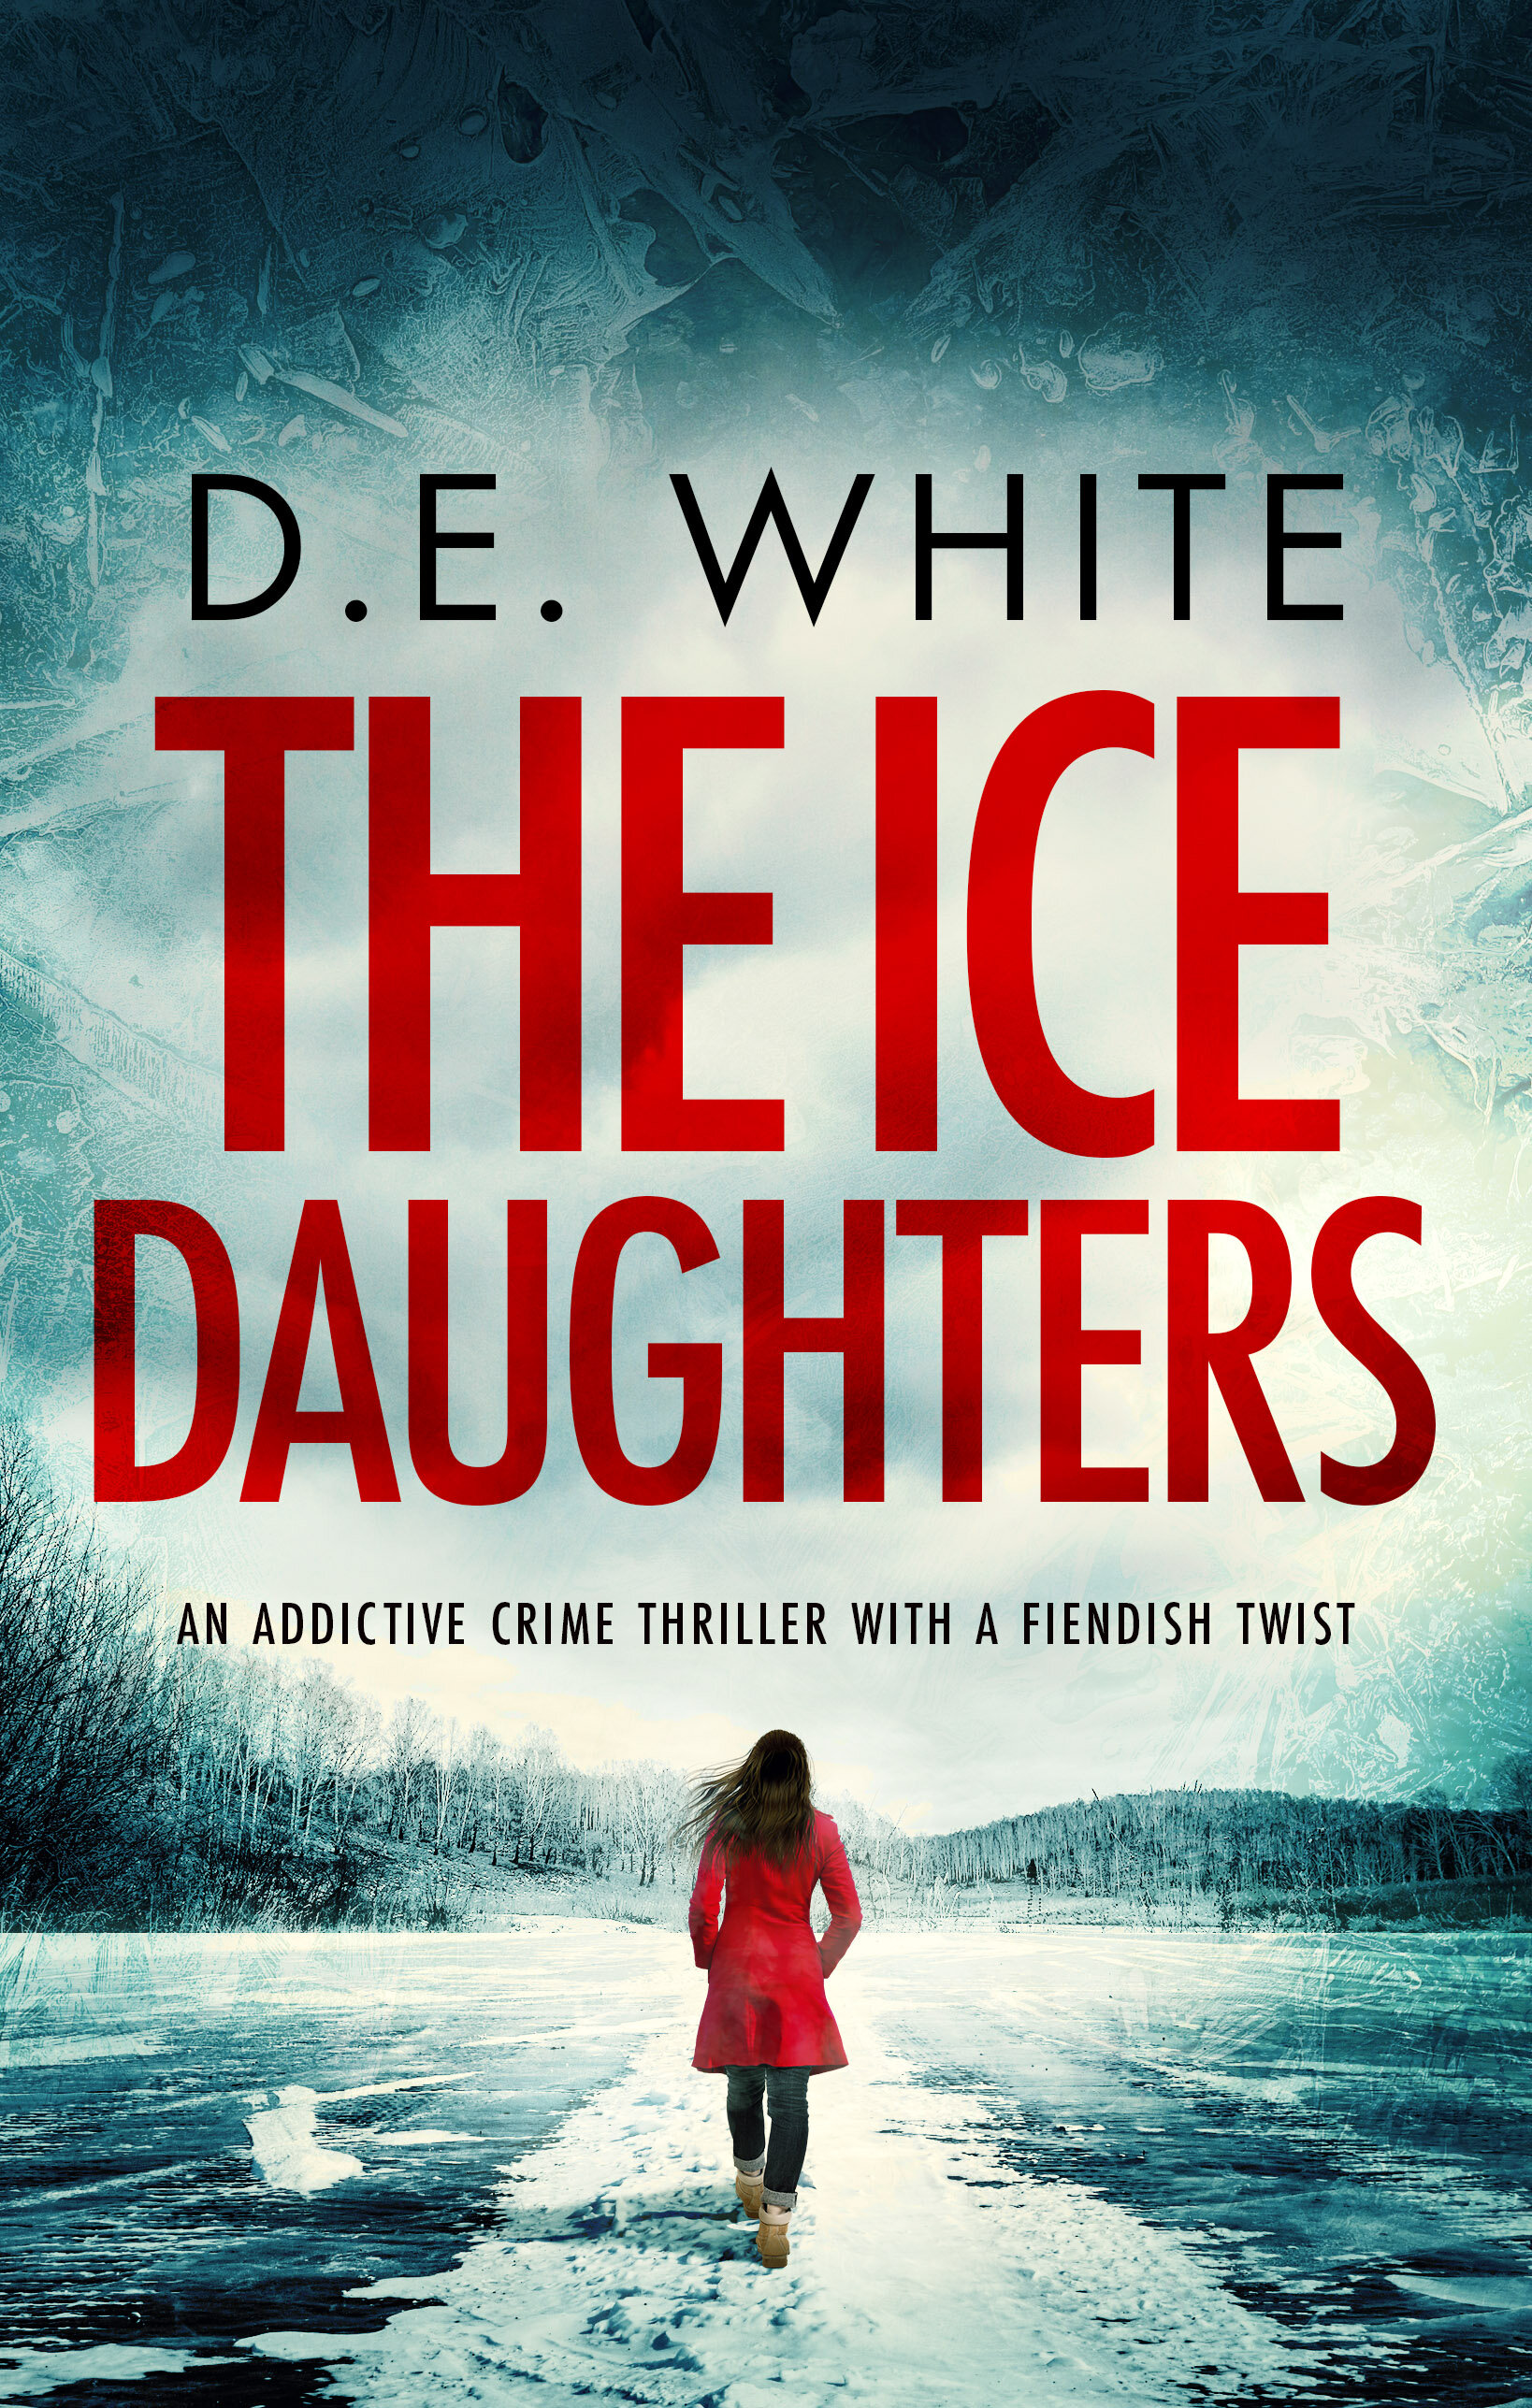 THE ICE DAUGHTERS publish cover.jpg